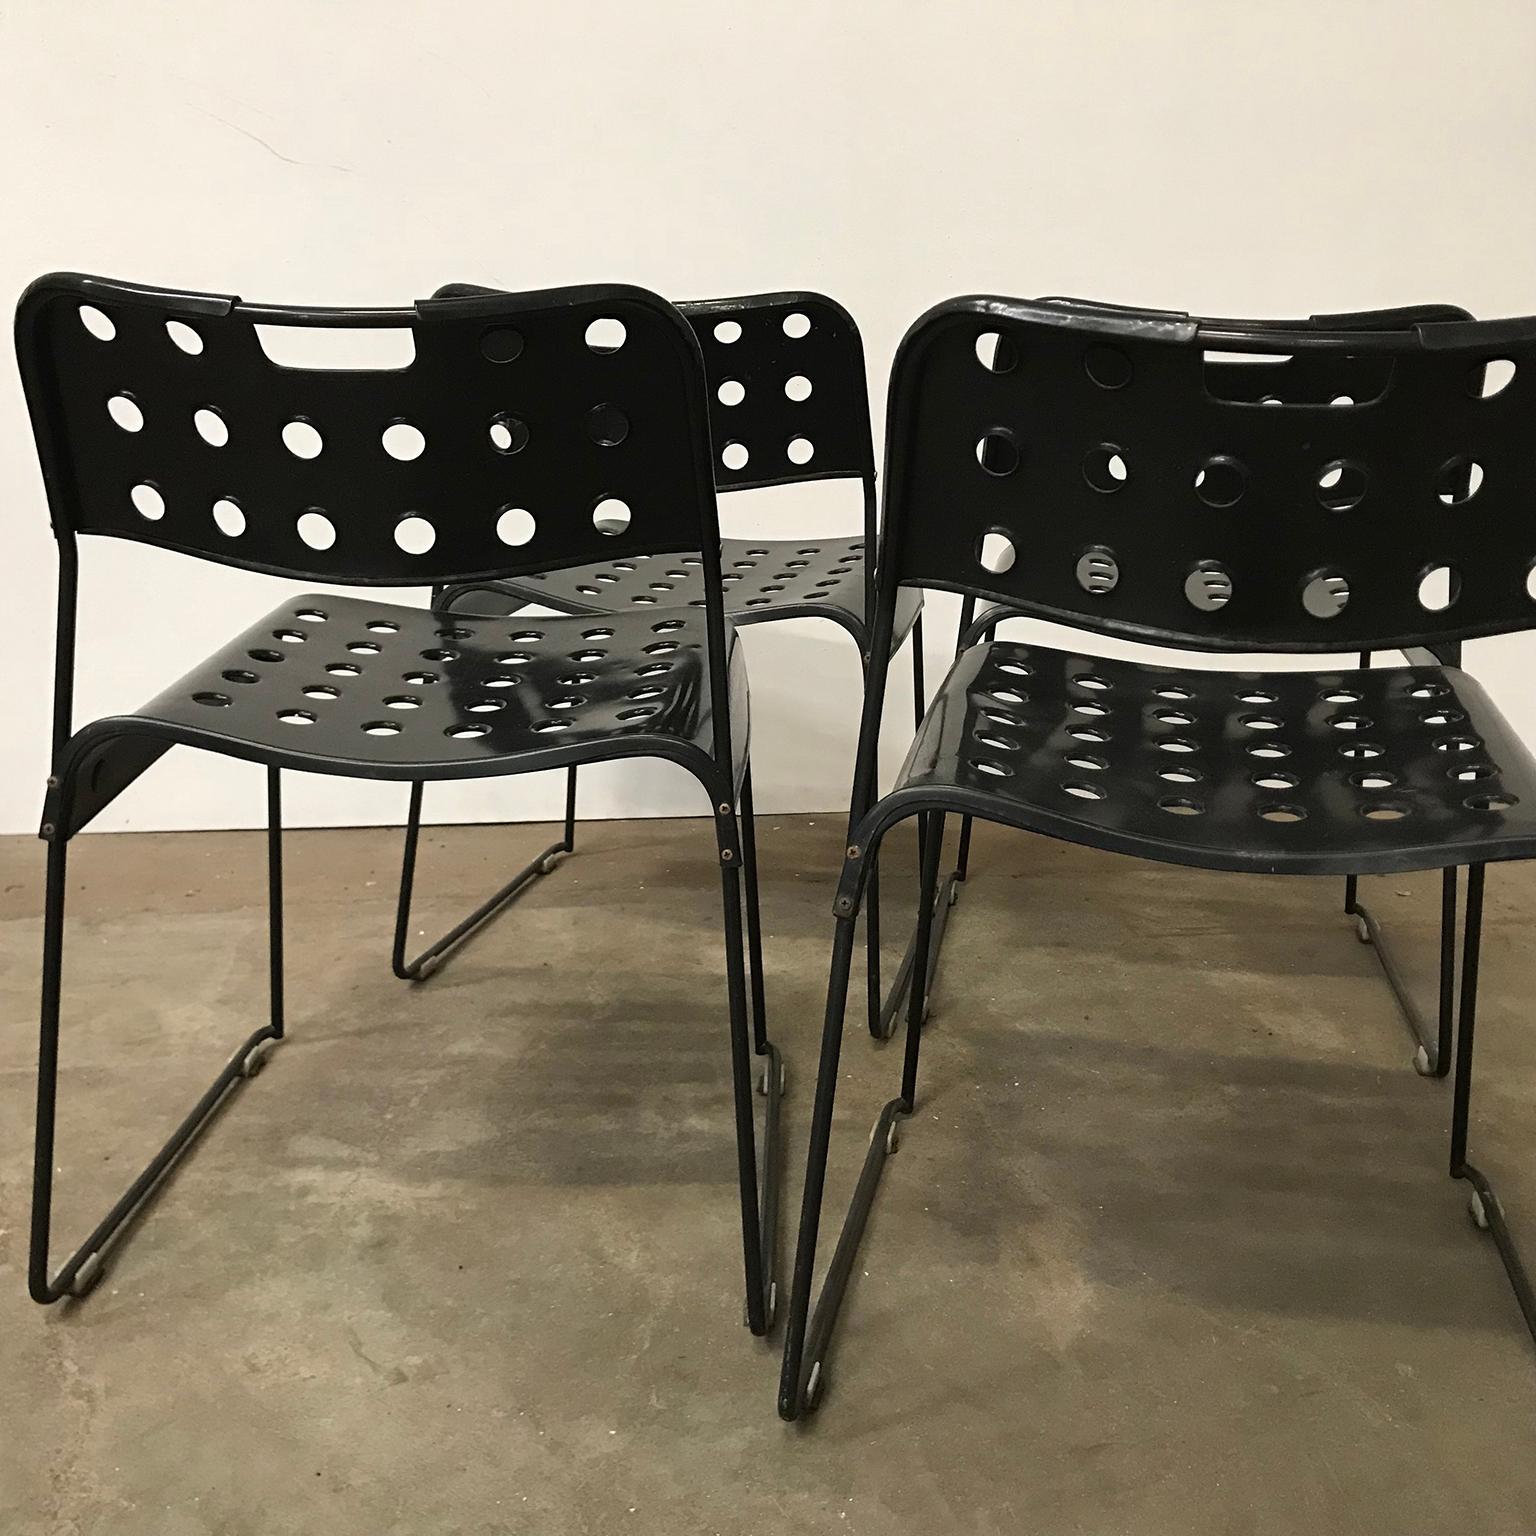 1971, Rodney Kinsman, Set of Rare All Black, Incl. Frame, Omstak Stacking Chairs 10